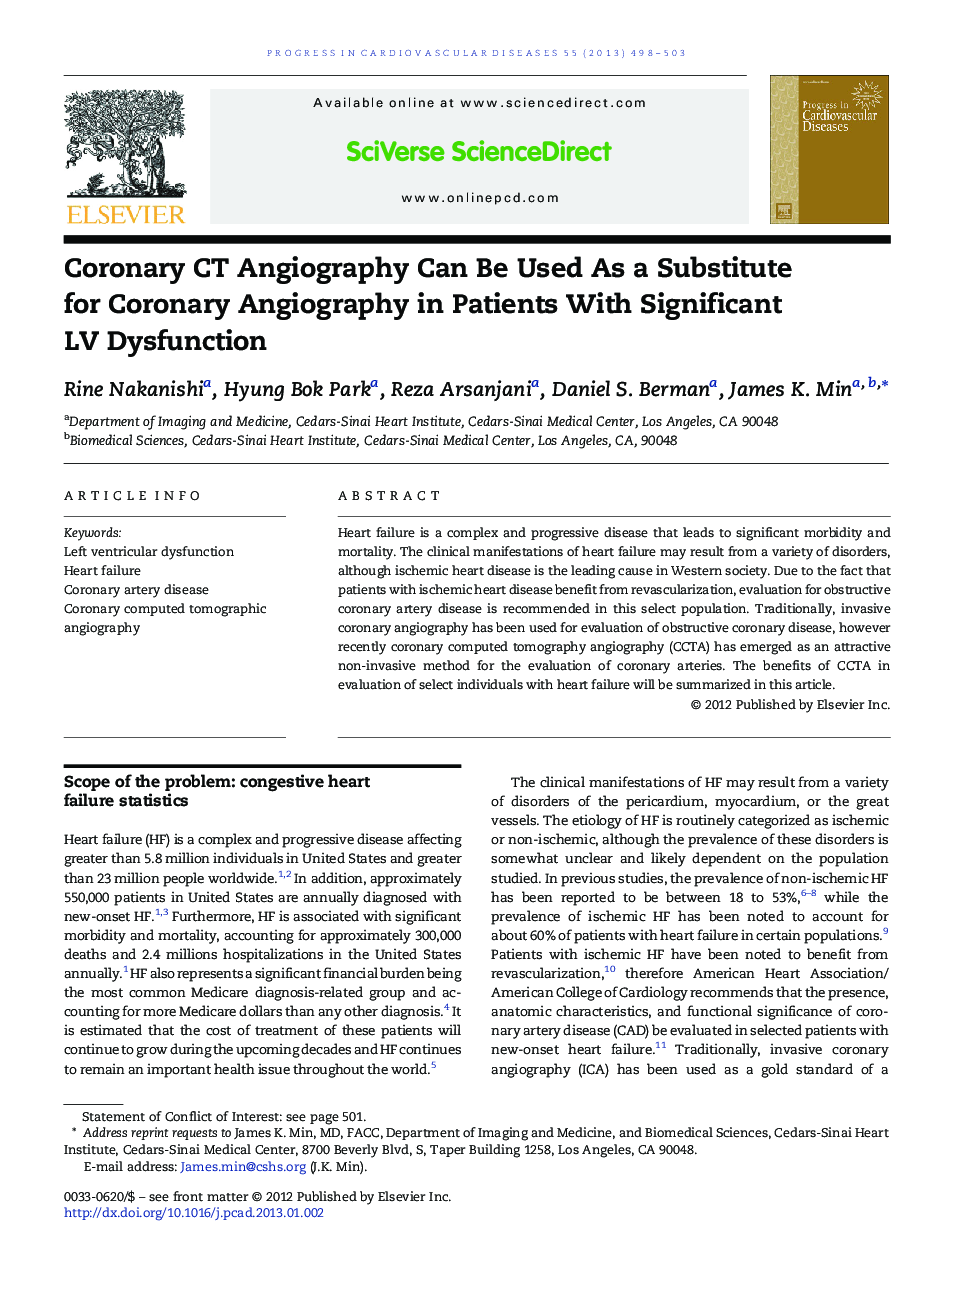 Coronary CT Angiography Can Be Used As a Substitute for Coronary Angiography in Patients With Significant LV Dysfunction 